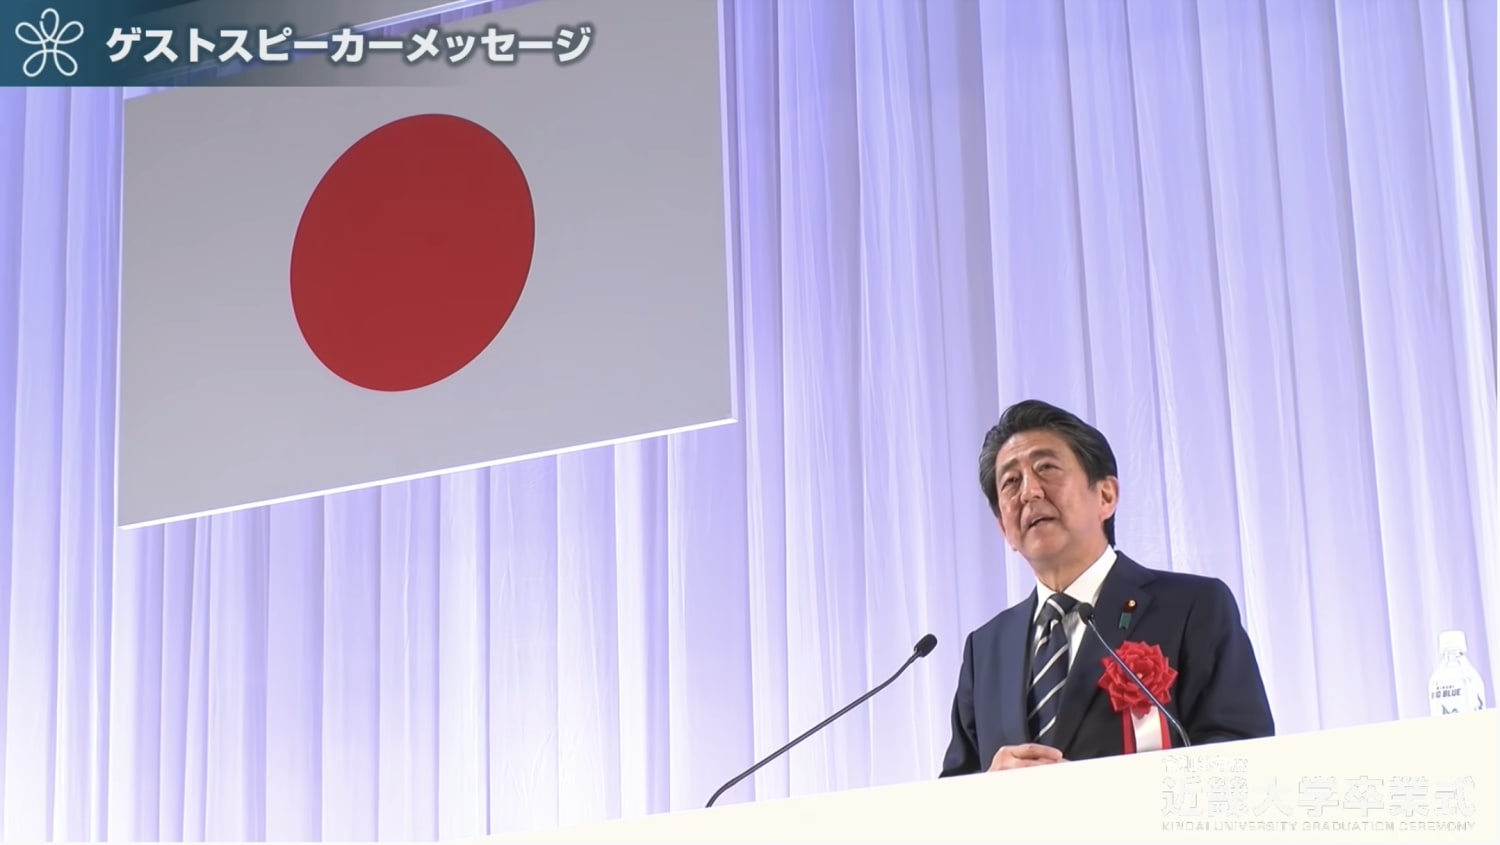 The late Shinzo Abe delivering a commencement speech at Kindai University's graduation ceremony on March 19, 2022.